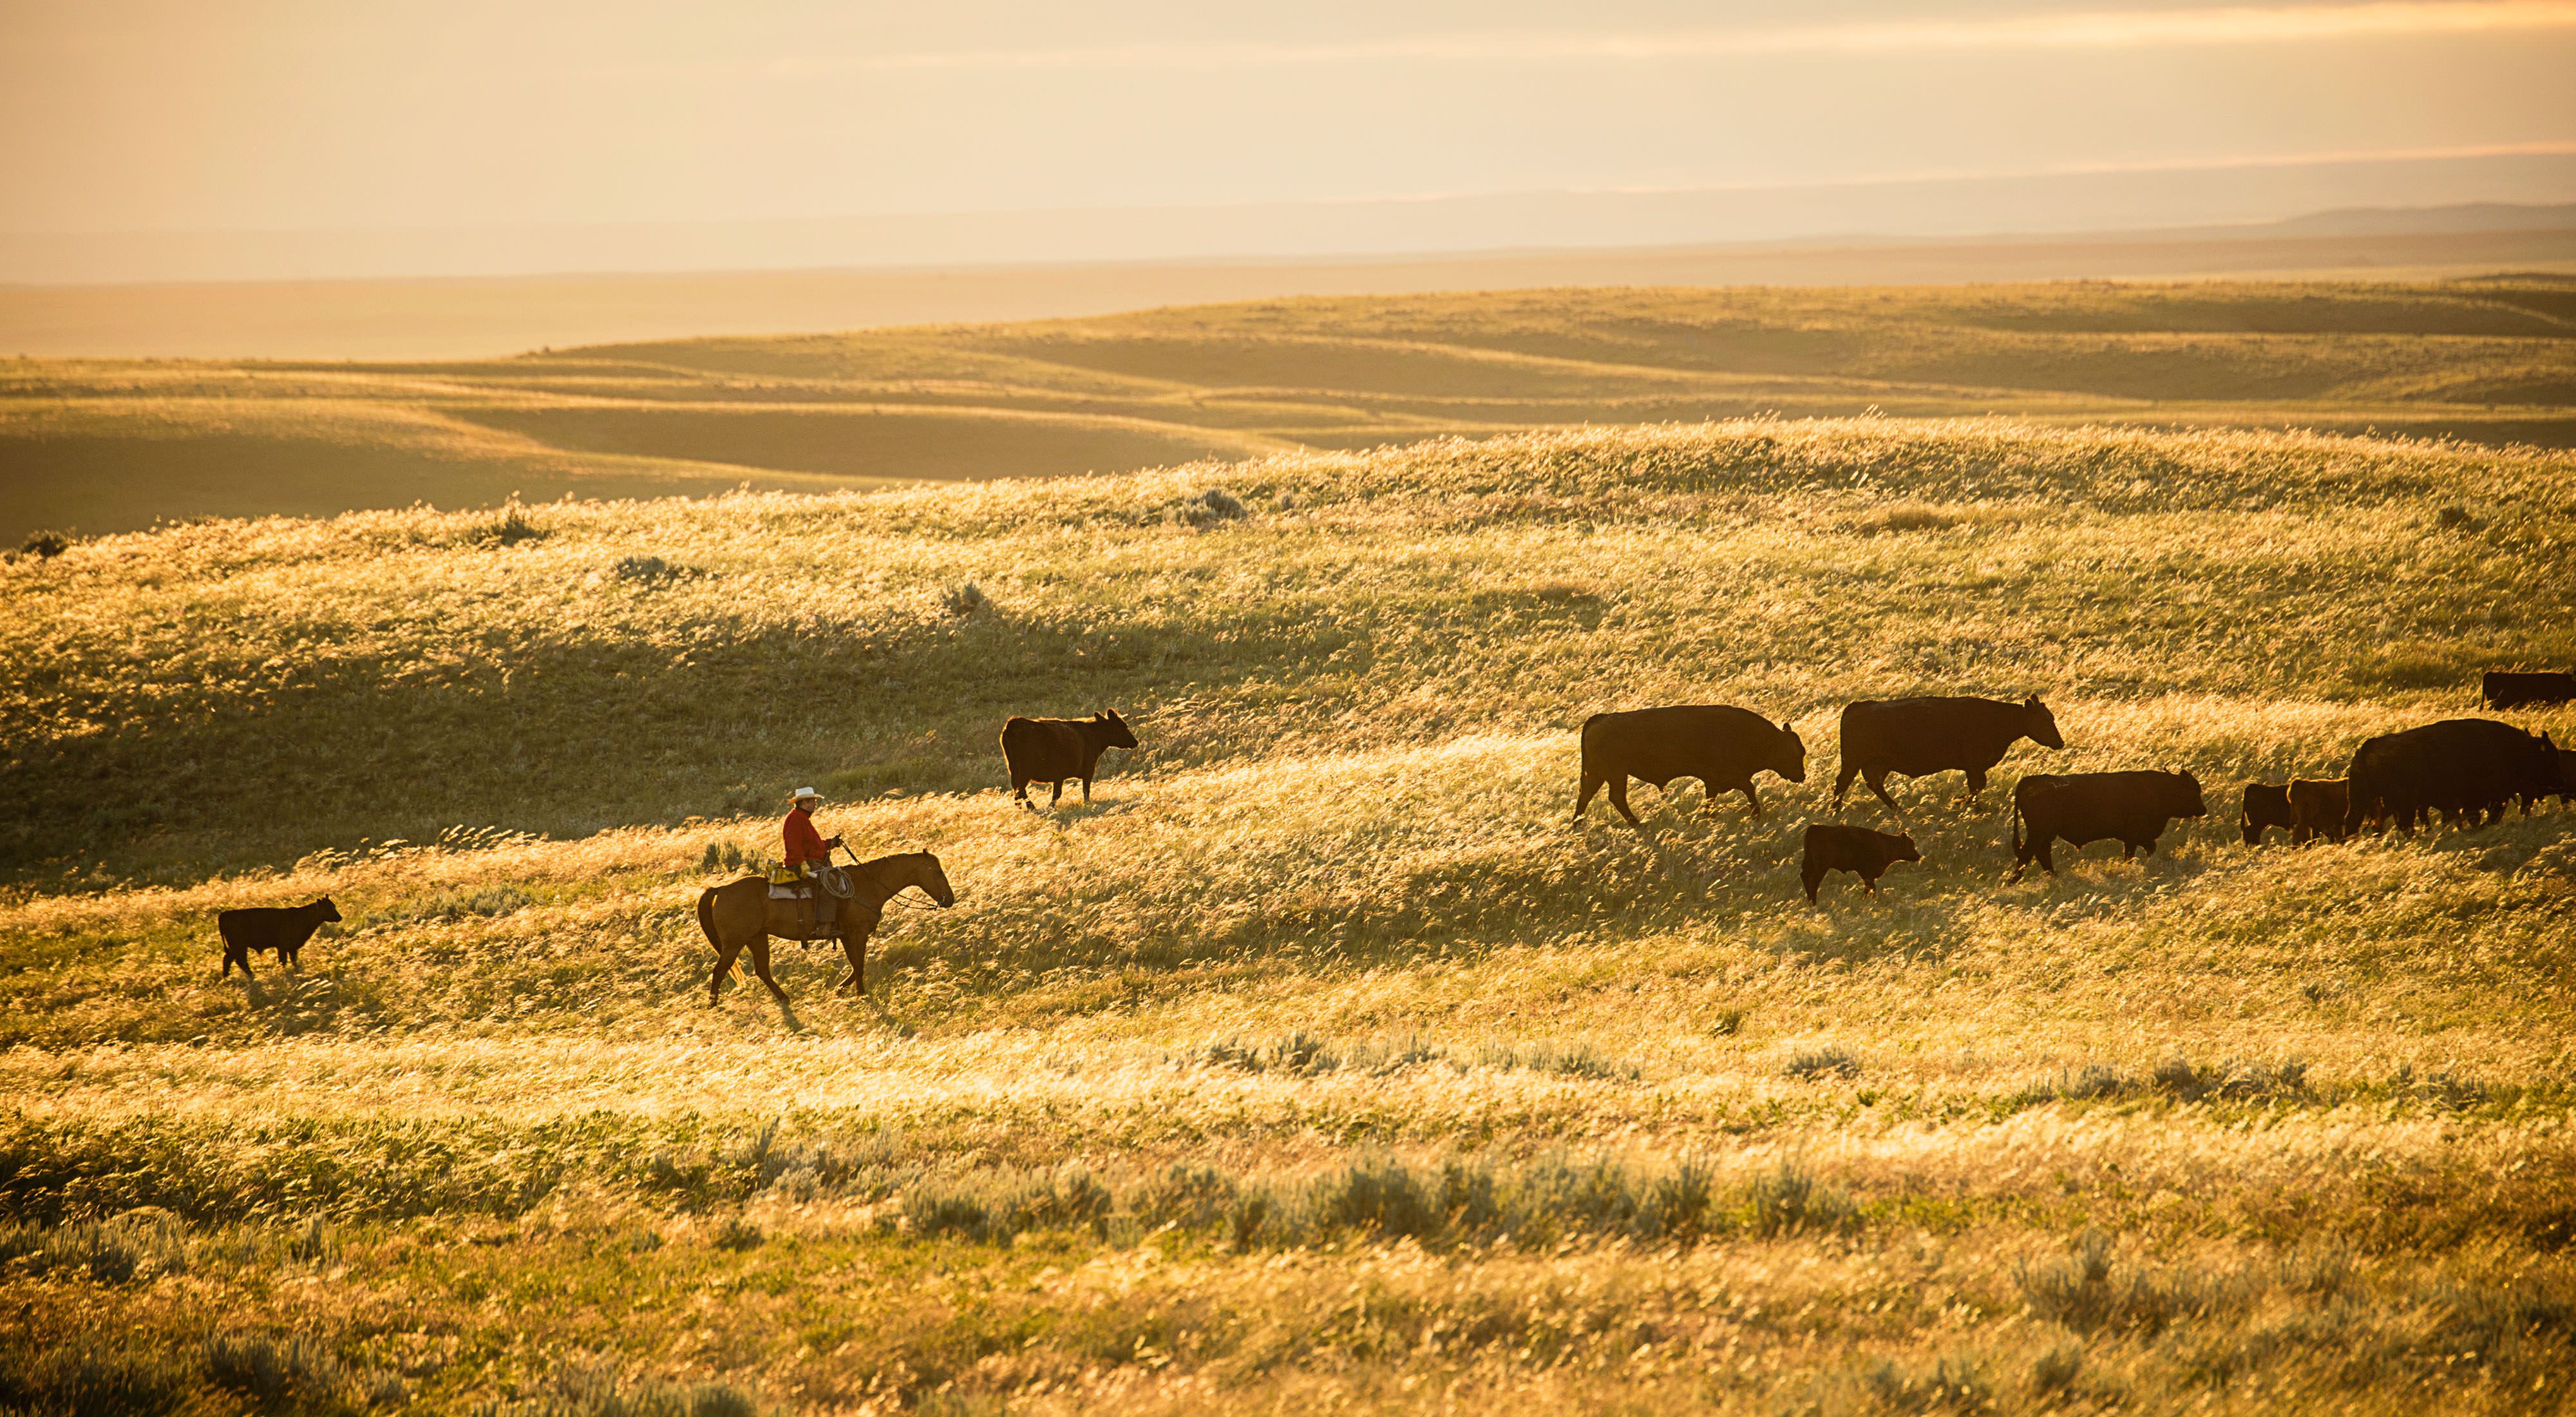 A cowboy riding on a horse, cows nearby, on a sunset-washed prairie in Montana.